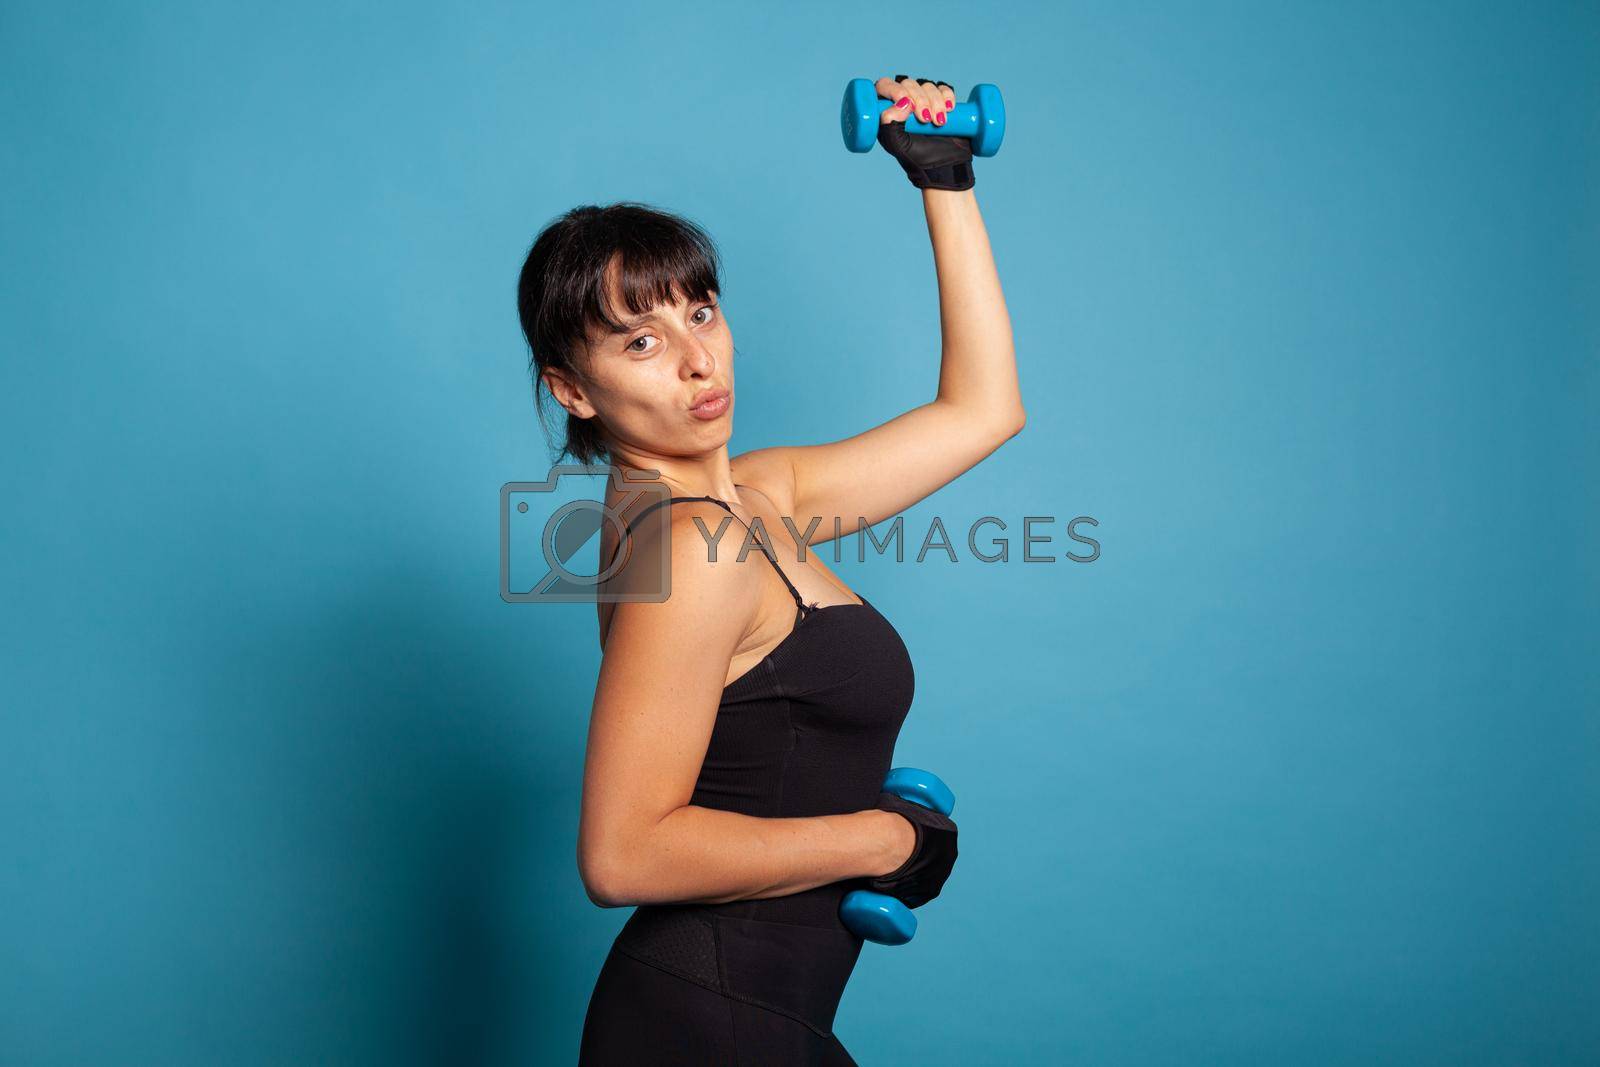 Royalty free image of Portrait of smiling active trainer showing arm muscles by DCStudio